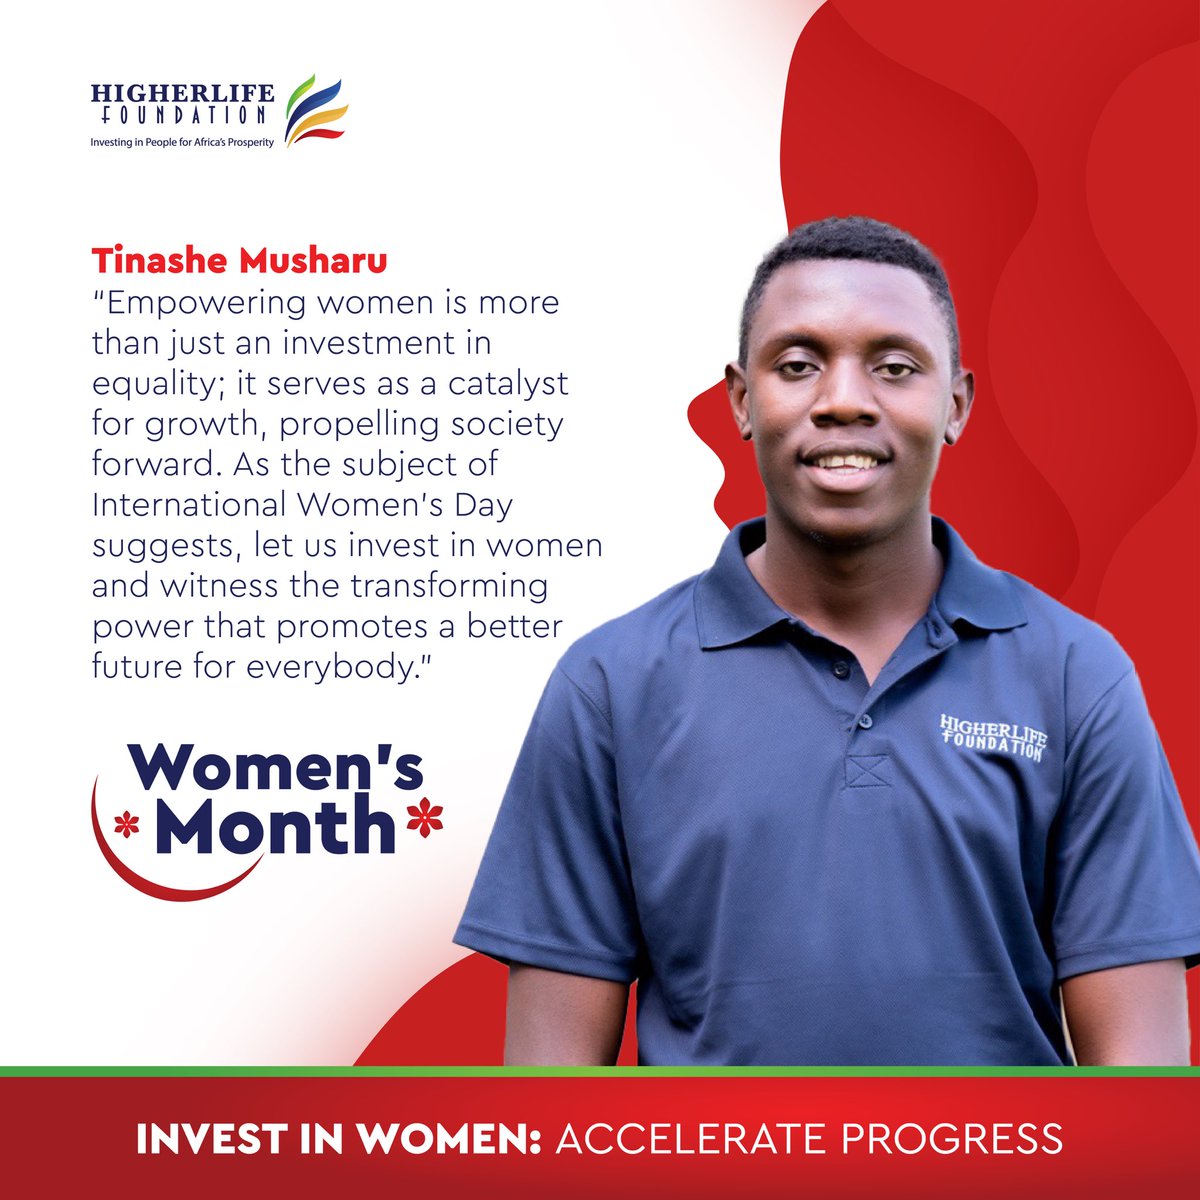 Men aren’t the focus of #WomensMonth but their participation as allies and advocates is crucial for achieving the ultimate goal: a world where everyone has equal opportunities to thrive #IWD #WomensMonth #InvestInWomen